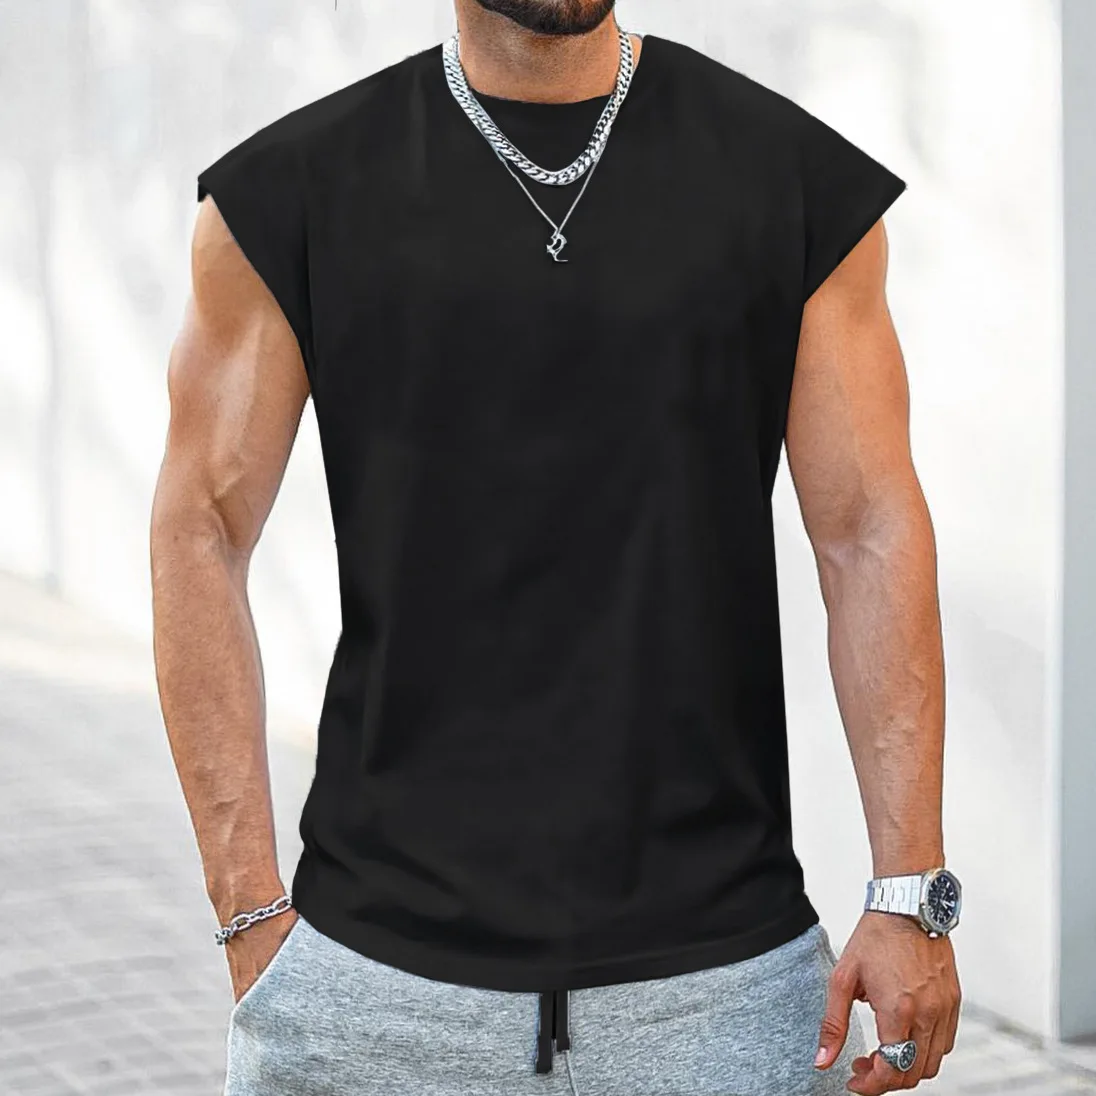 

Summer Pure Color Men Tank Top Cotton Workout Jogger Sleeveless Shirt Gym Fitness Training Waistcoat Male Vest Casual Top Clothg